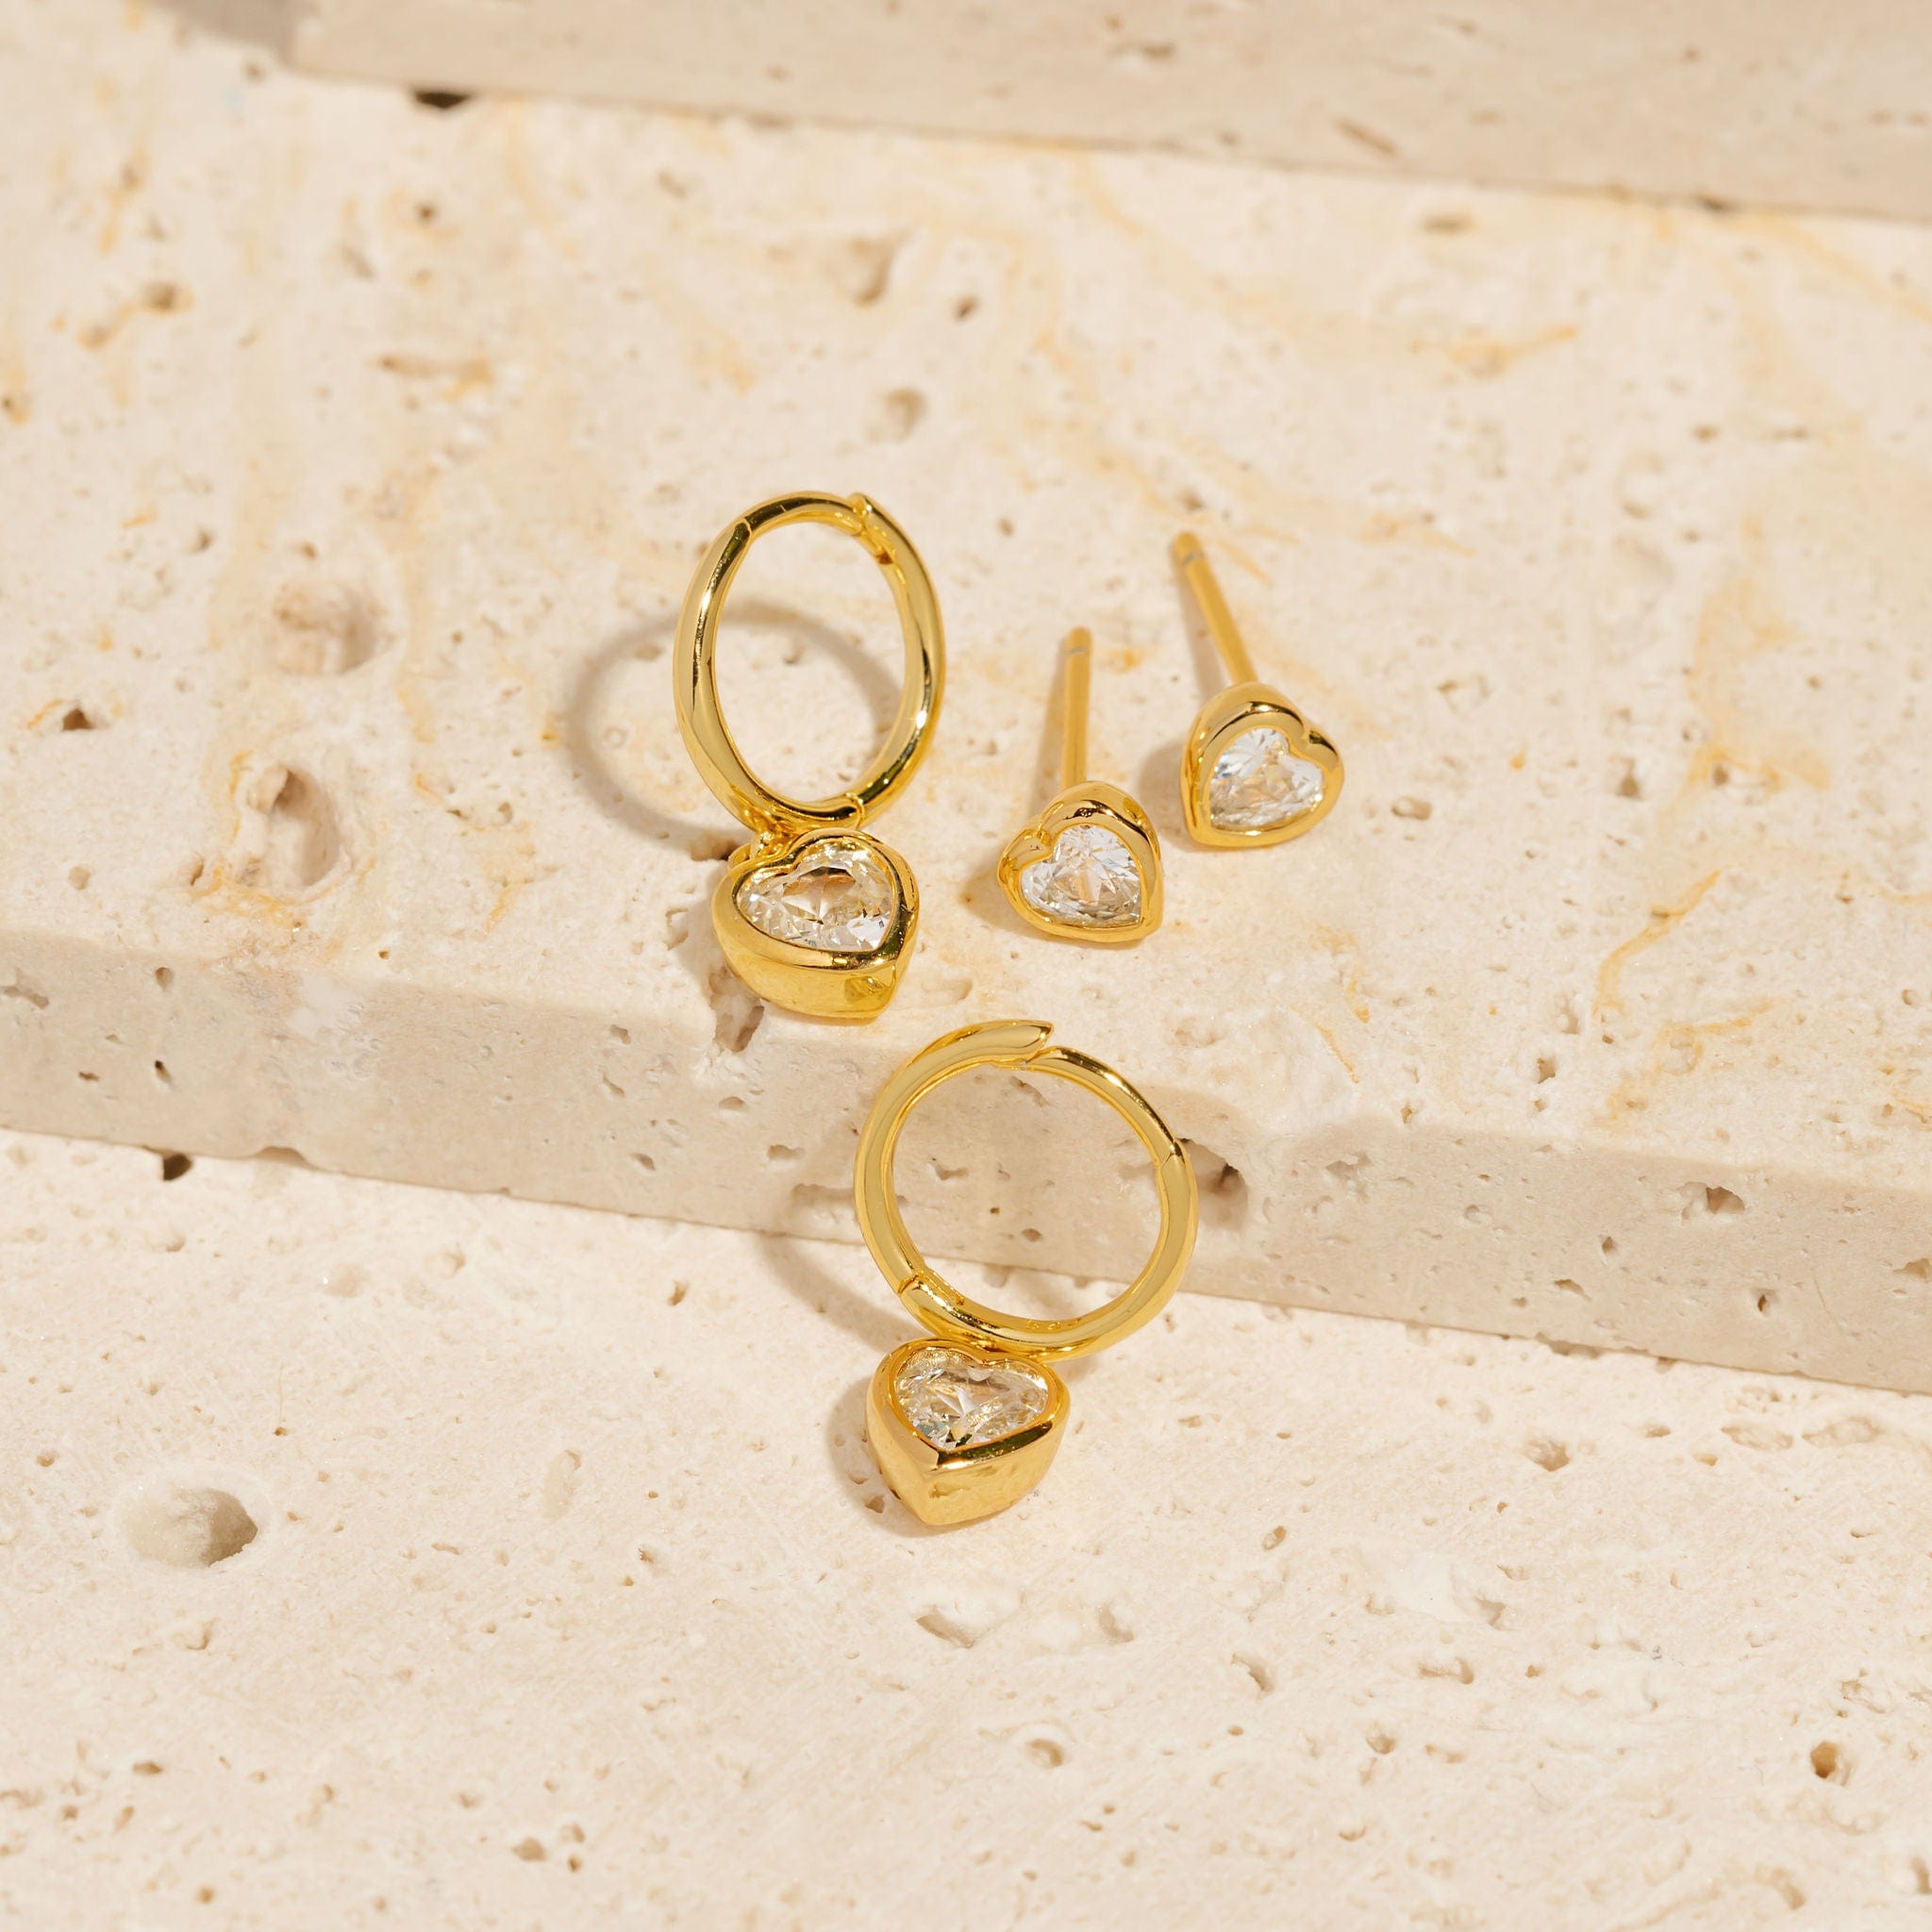 A pair of Amore Drop Hoop earrings is displayed next to a pair of Amore Stud earrings, each showing off its heart-shaped crystal accents and shining gold settings. 